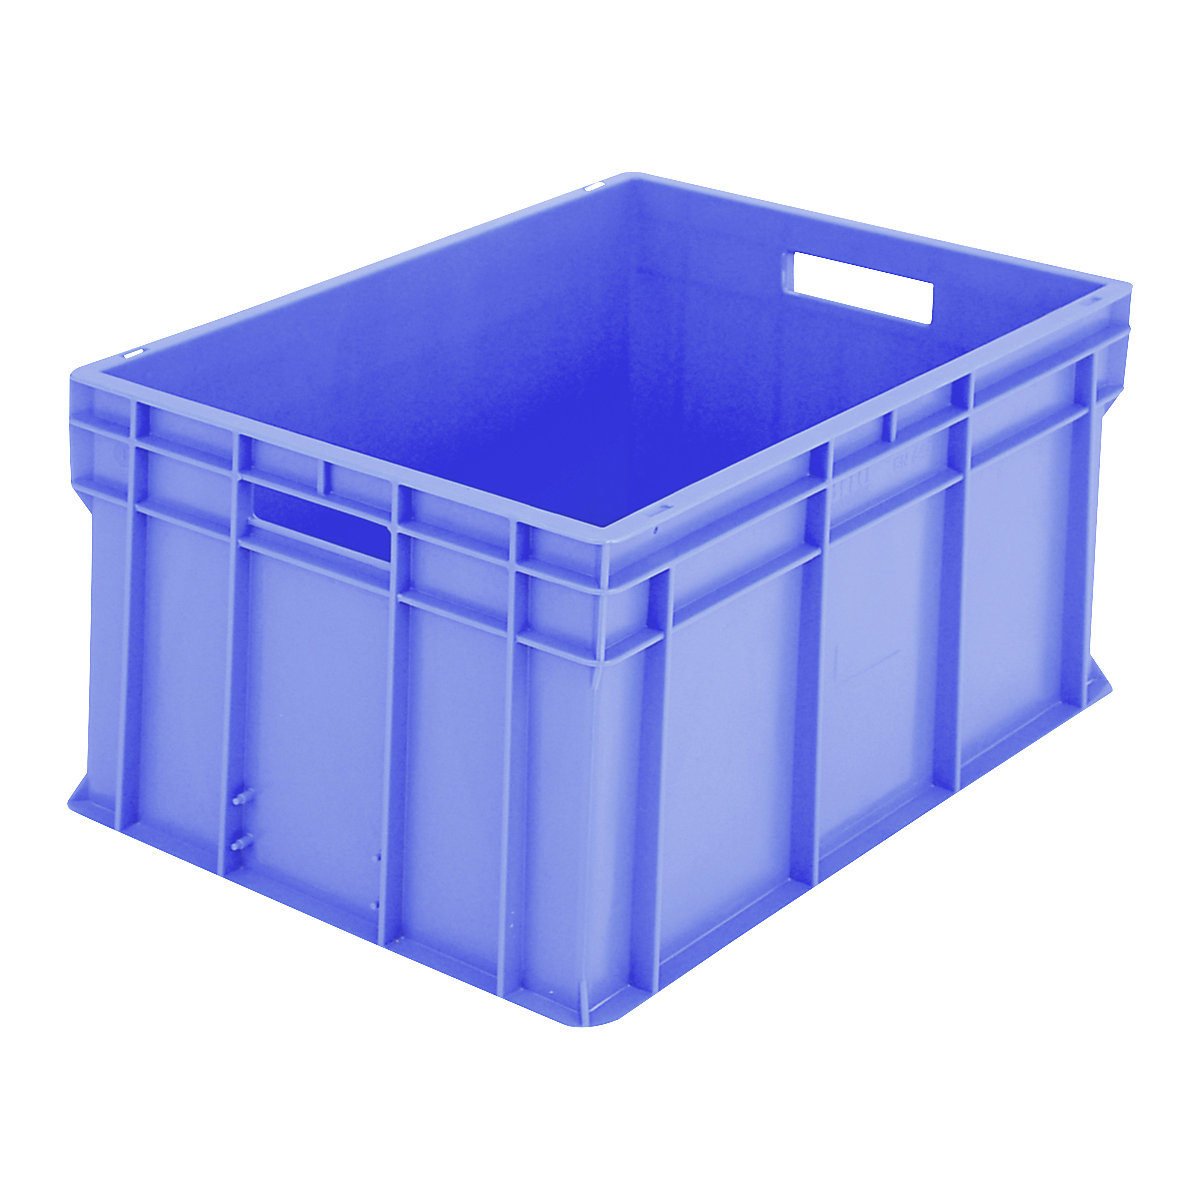 BN Euro stacking container – BITO, solid walls and base, LxWxH 600 x 400 x 315 mm-3